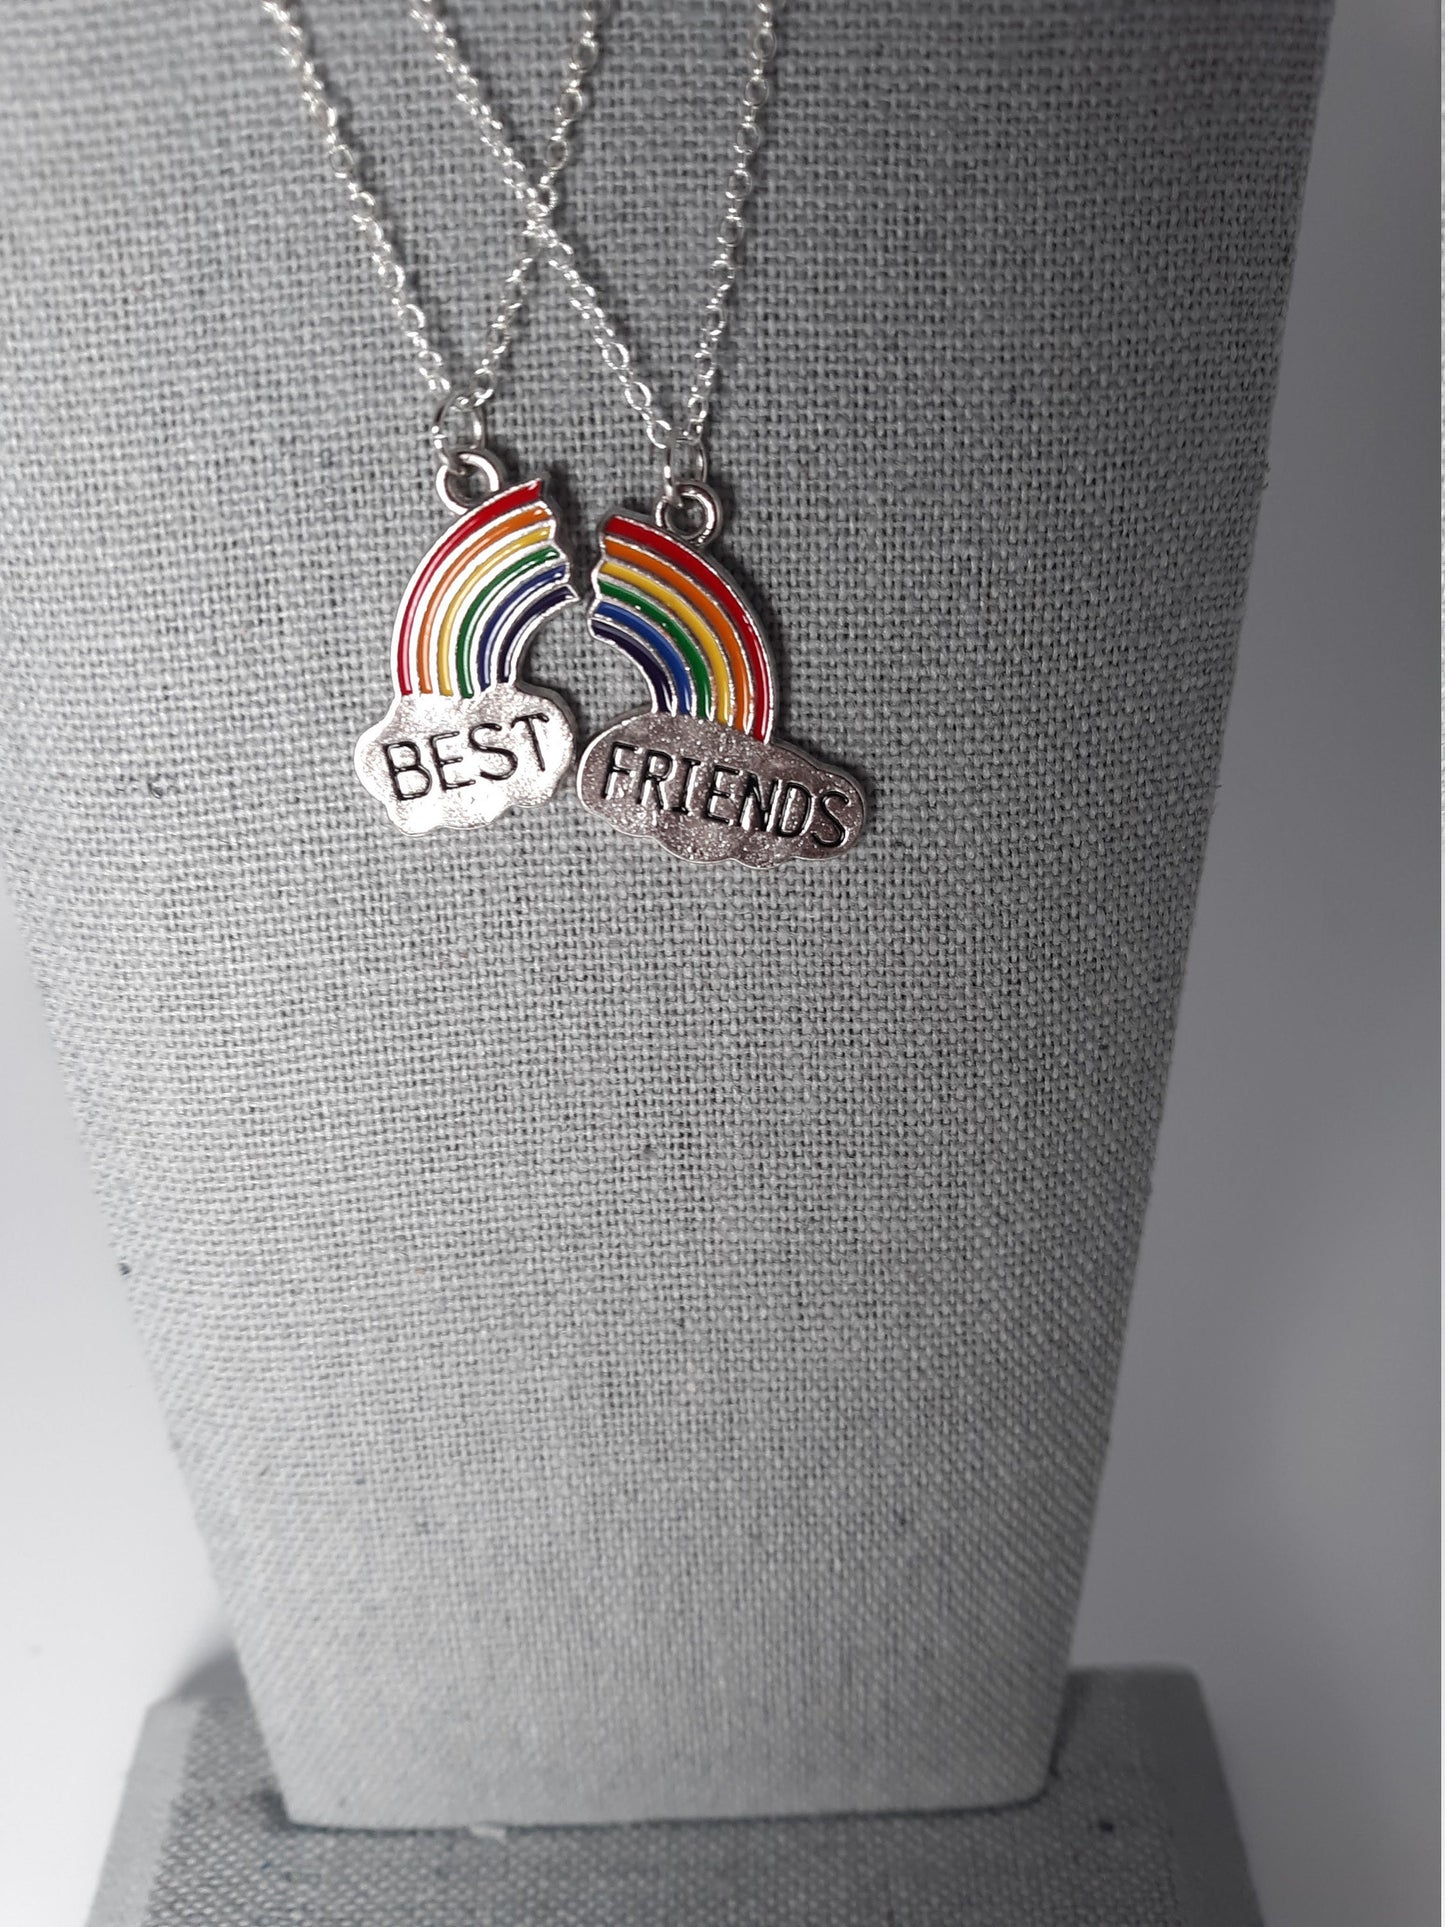 Rainbow Best Friend Necklaces (Perfect for Kids/Teens/Adult Friends)